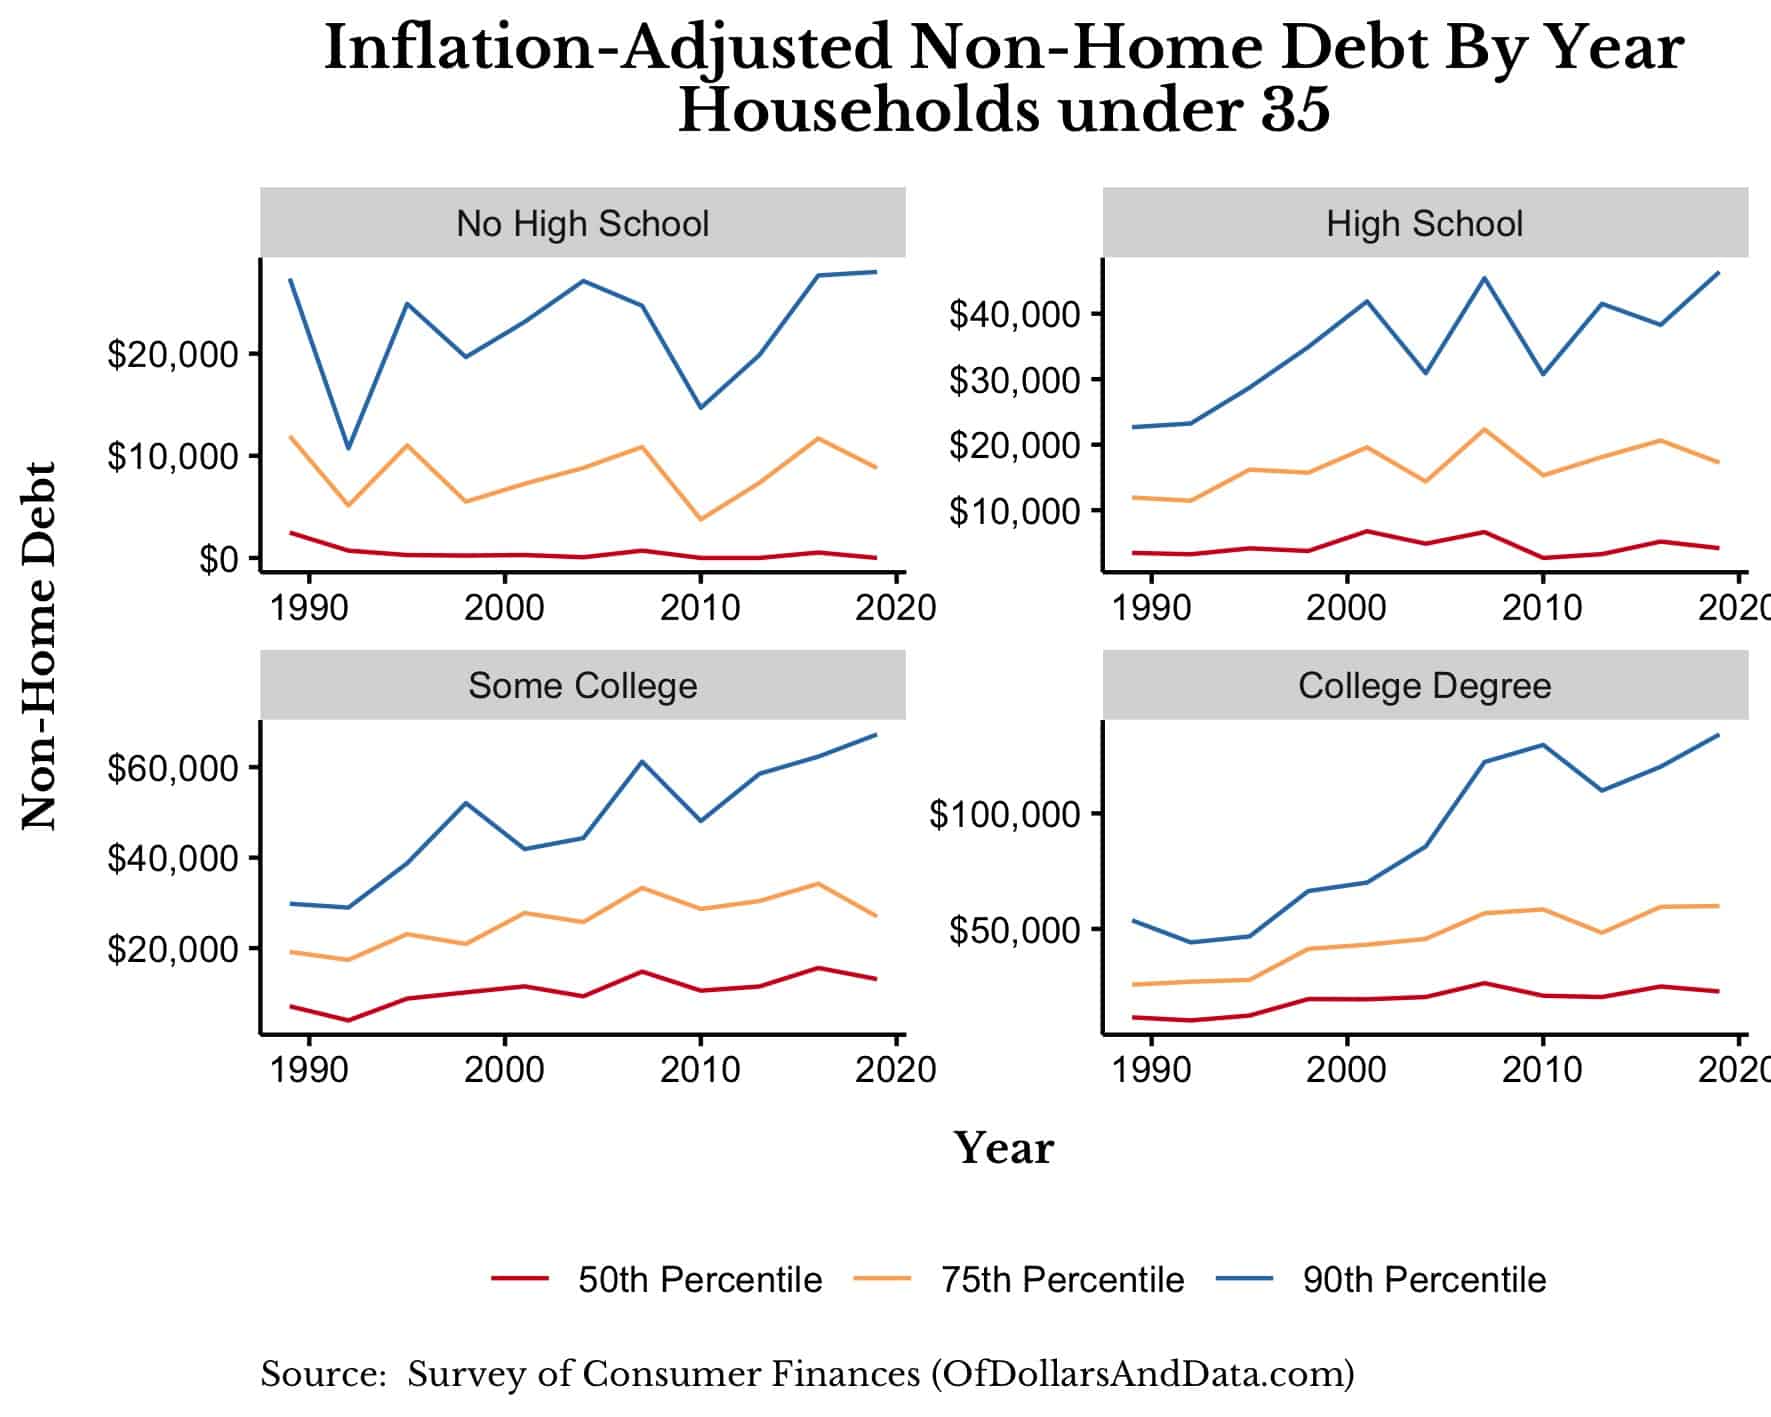 Inflation-adjusted non-home debt by year for households under 35 broken out by education level